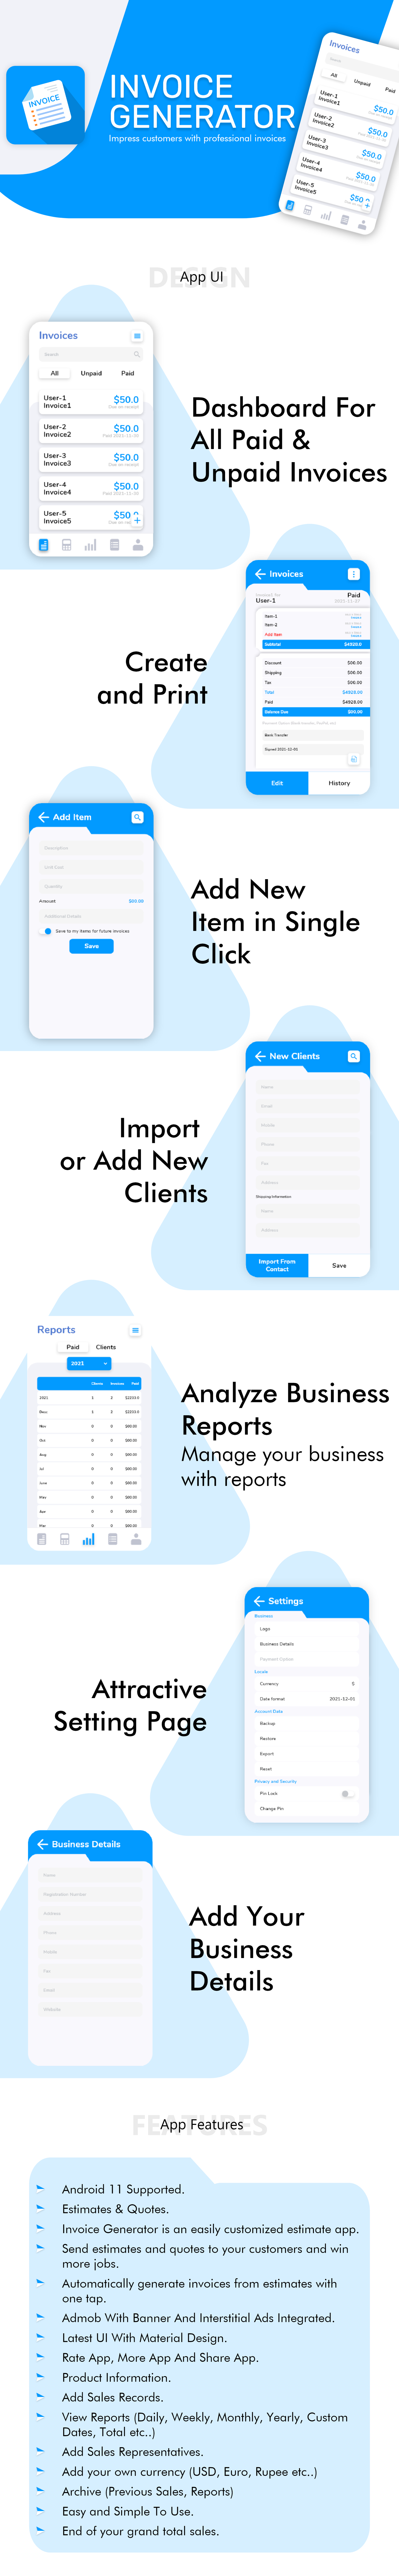 Invoice Generator - Professional Bills or GST Invoices - Accounting - Android - Admob Ads - 1